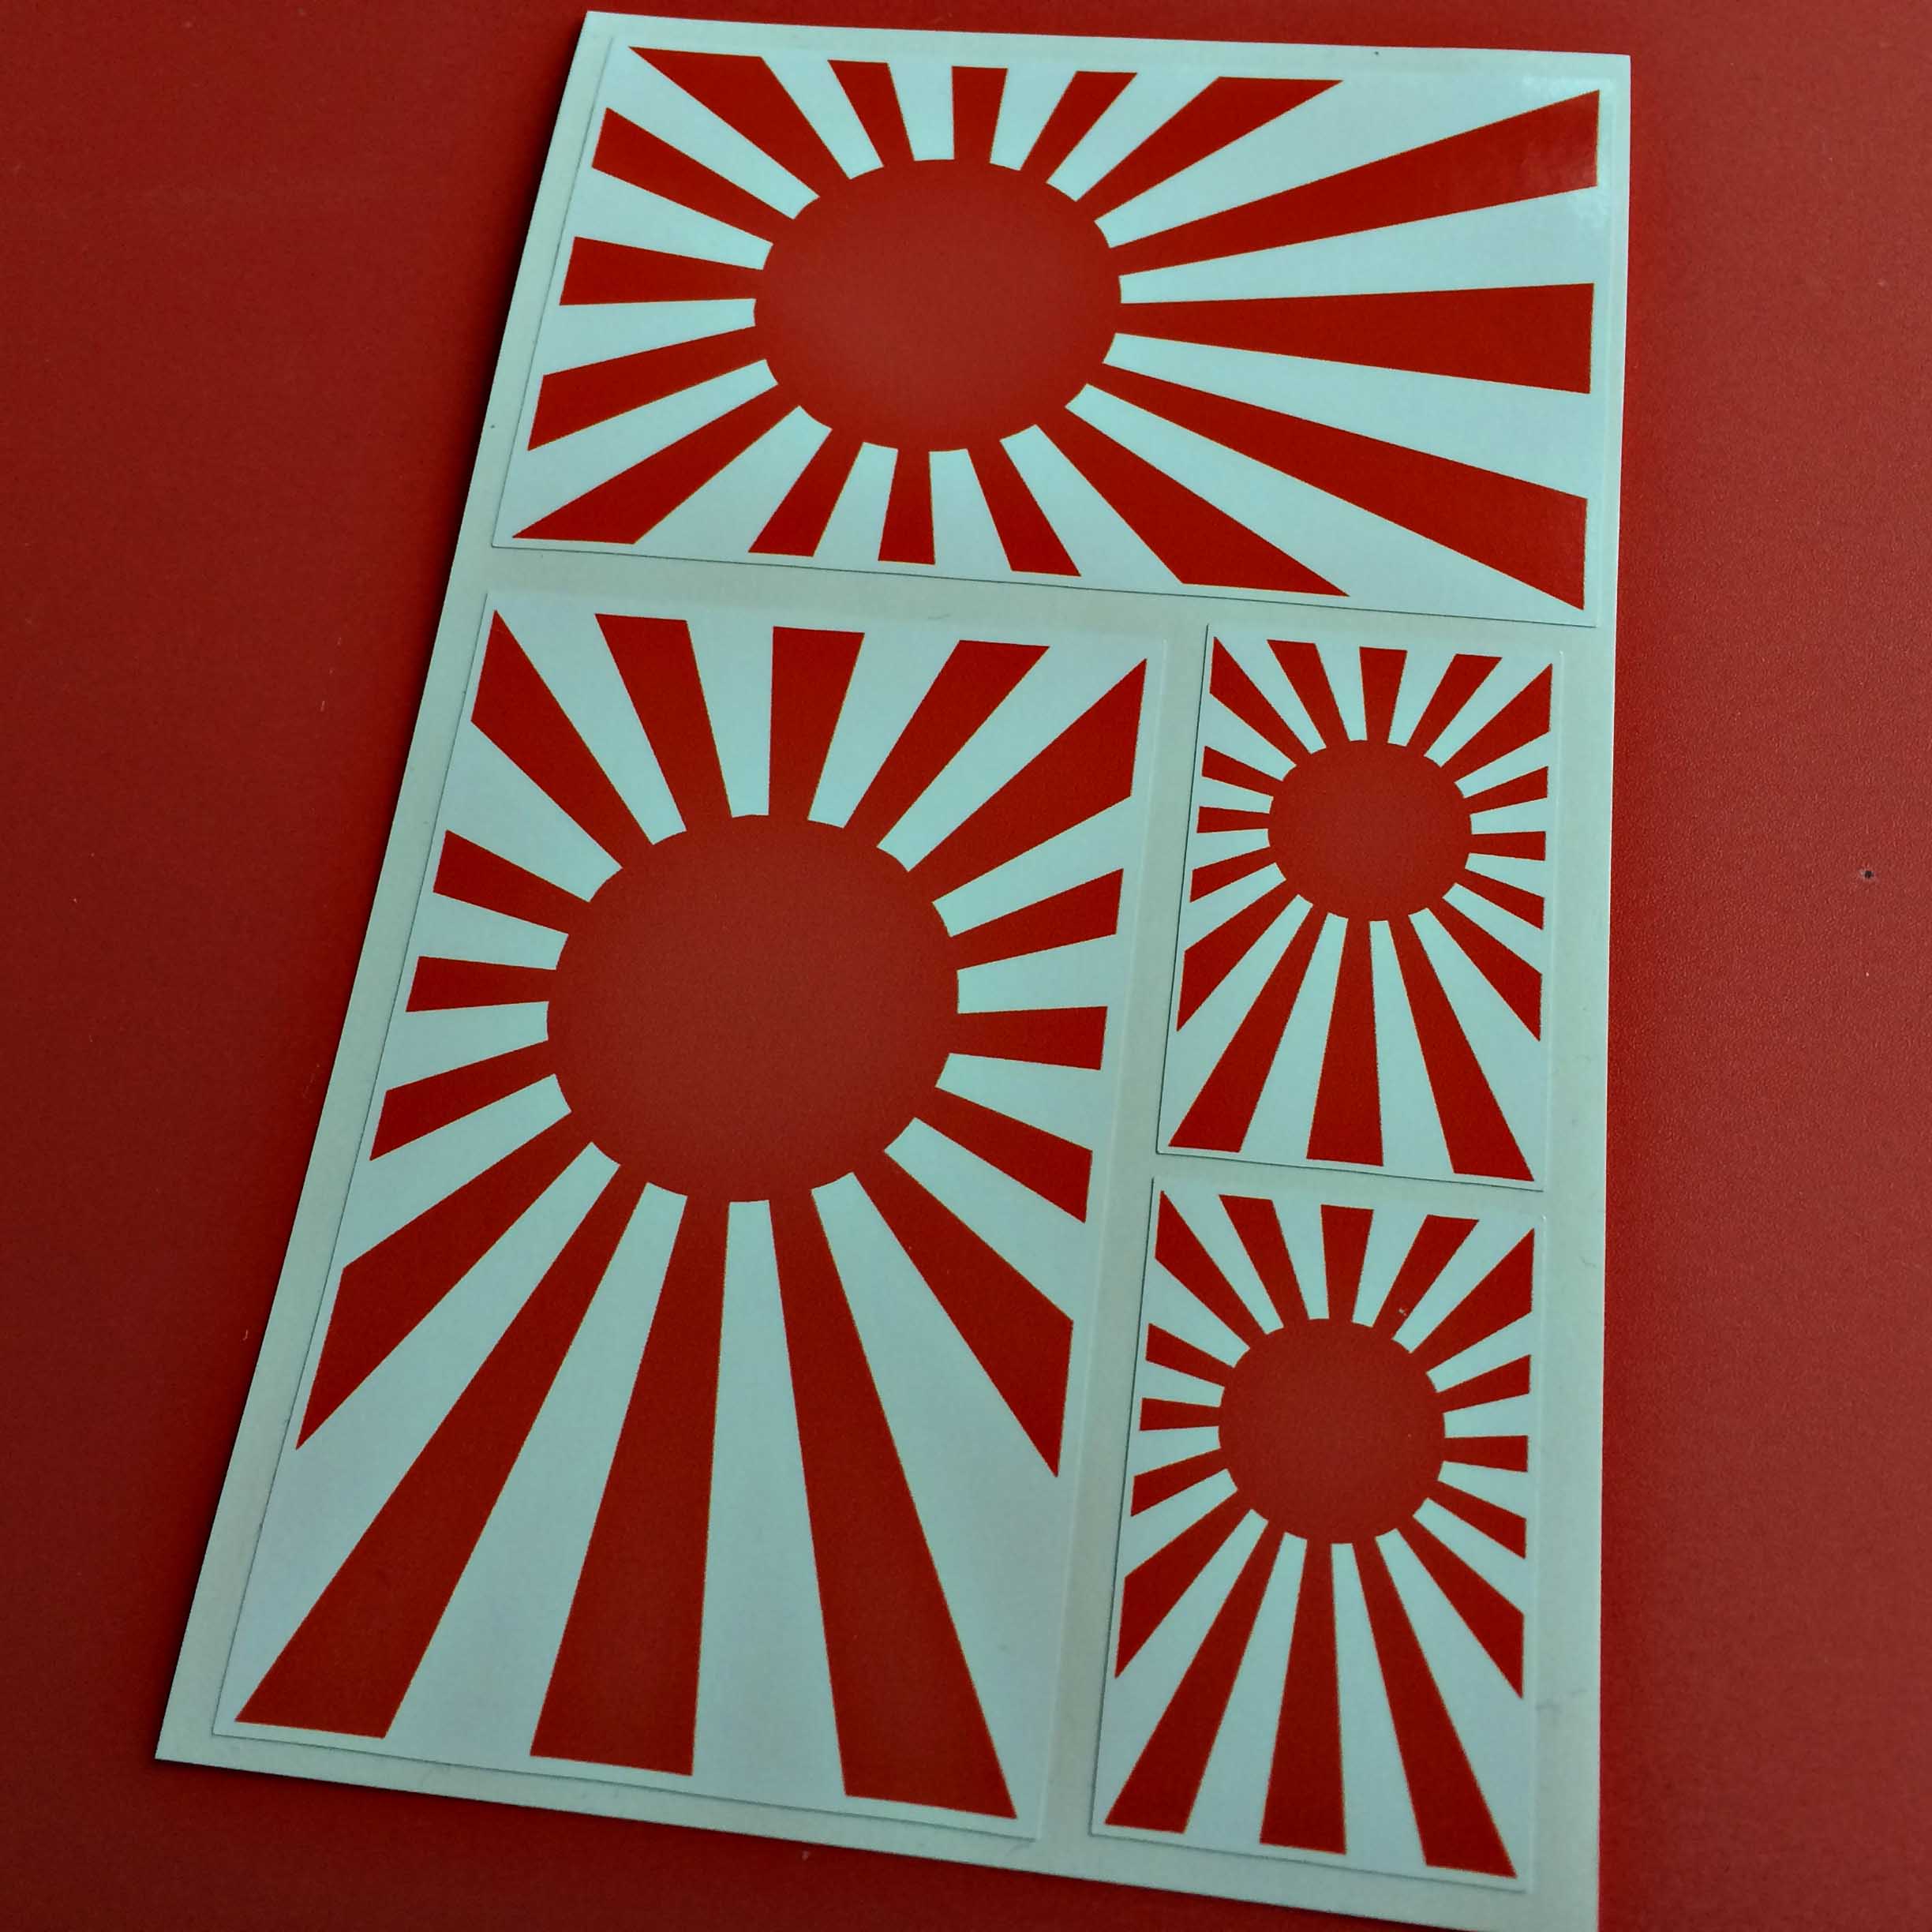 JAPANESE RISING SUN STICKERS. The Rising Sun consists of a red disc and sixteen red rays emanating from the disc.